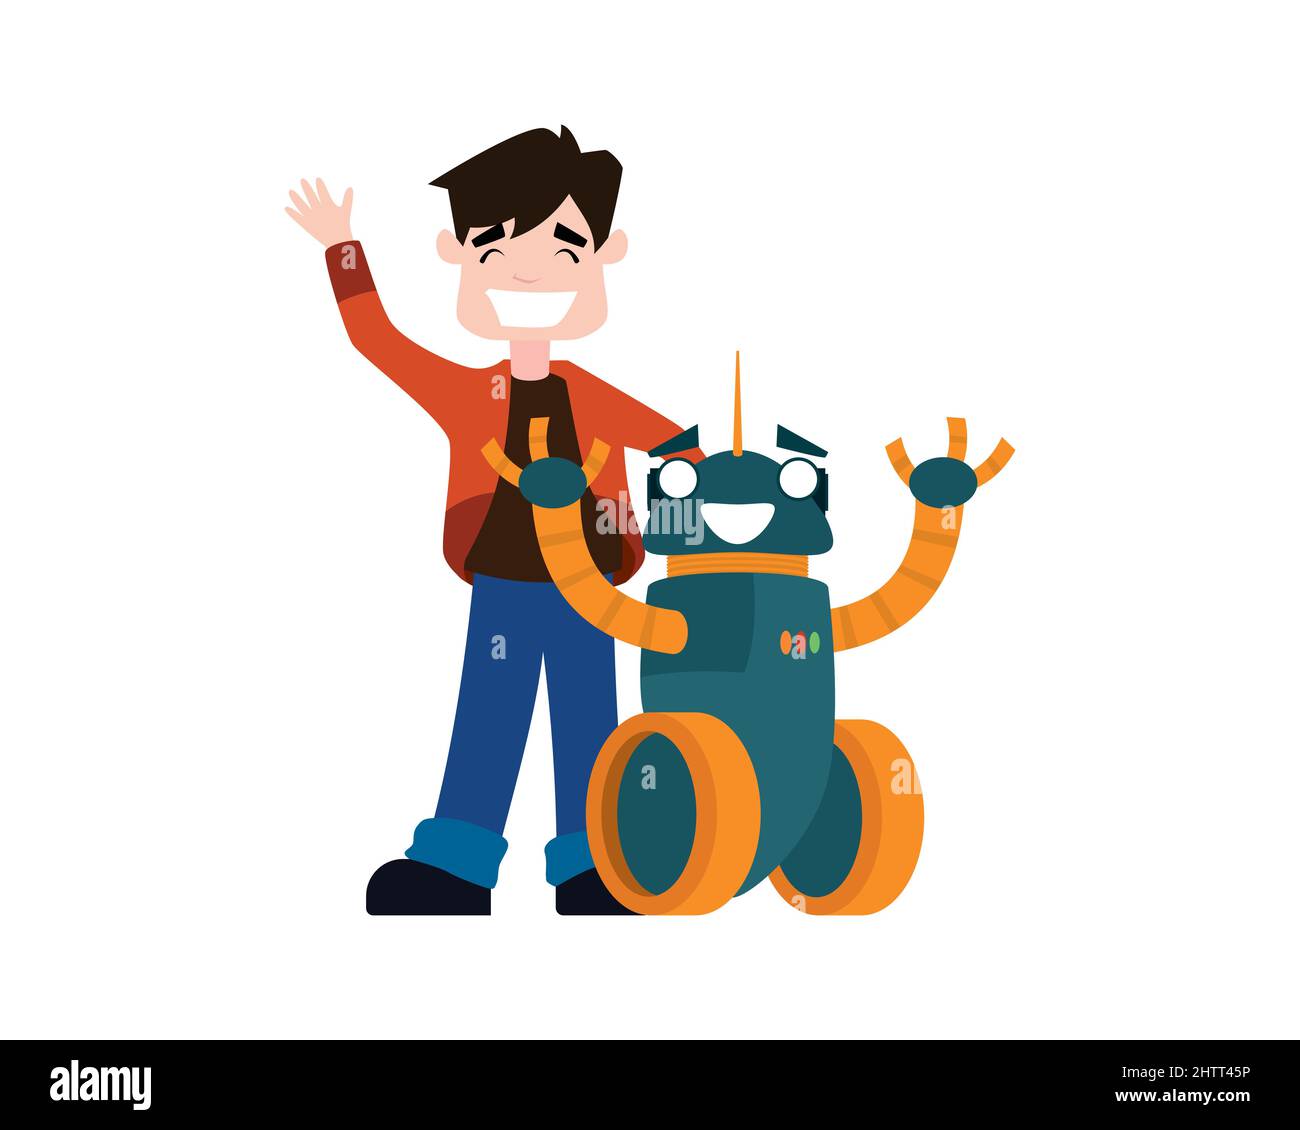 a Boy and Robot Greeting with Happy Expression Illustration Vector Stock Vector